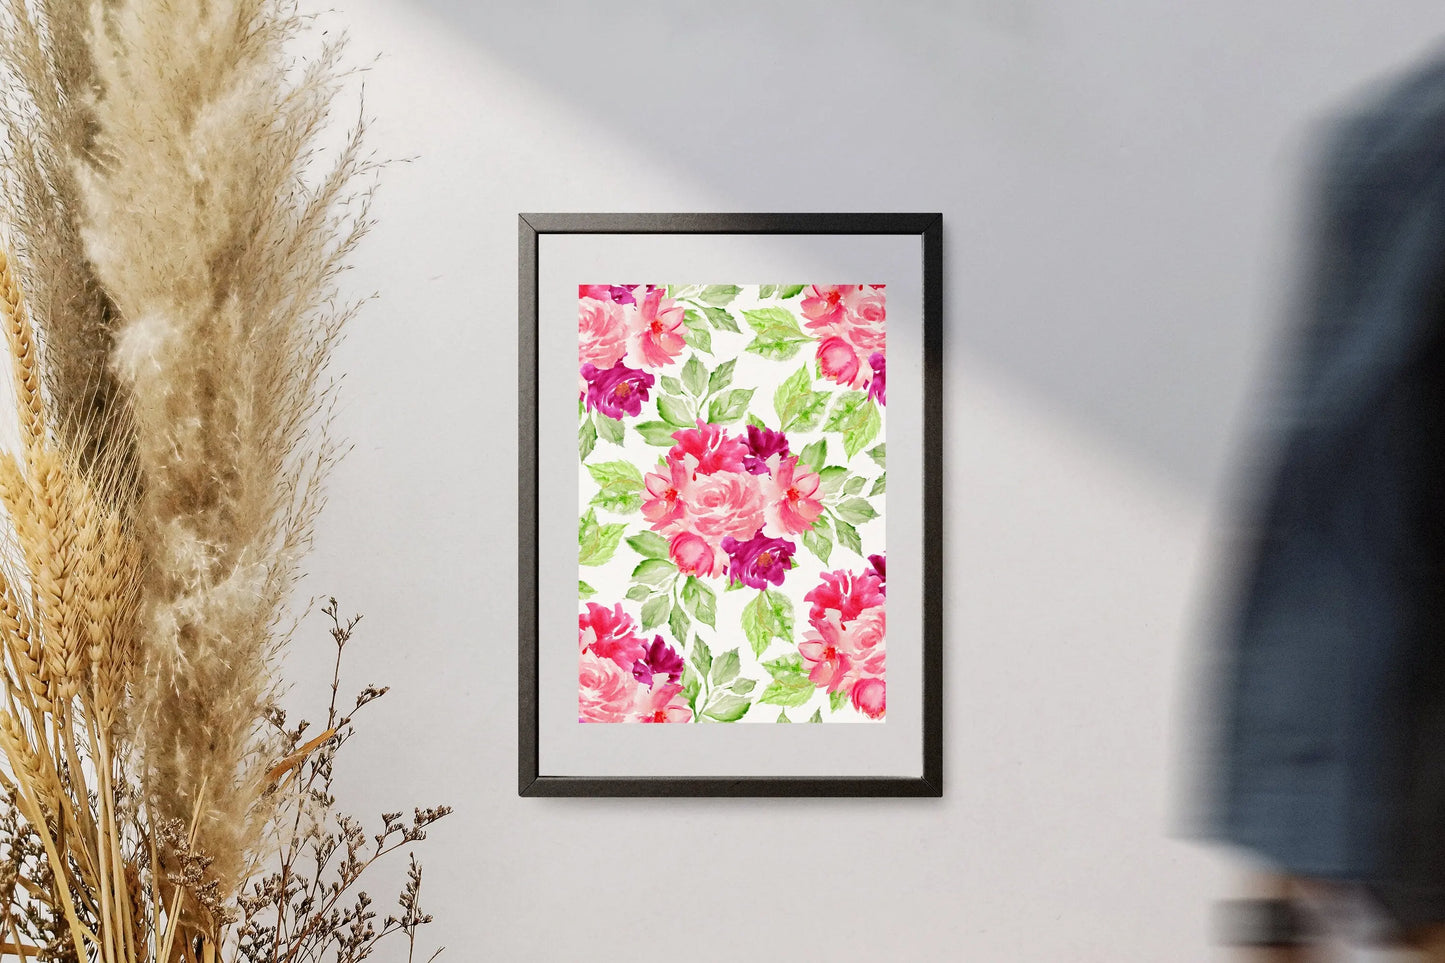 Watercolor Flowers, Floral Art Prints, Floral Wall Art, Bedroom Wall Decor, Valentines Day Gift, Gift for Her The Wedding Crest Lab